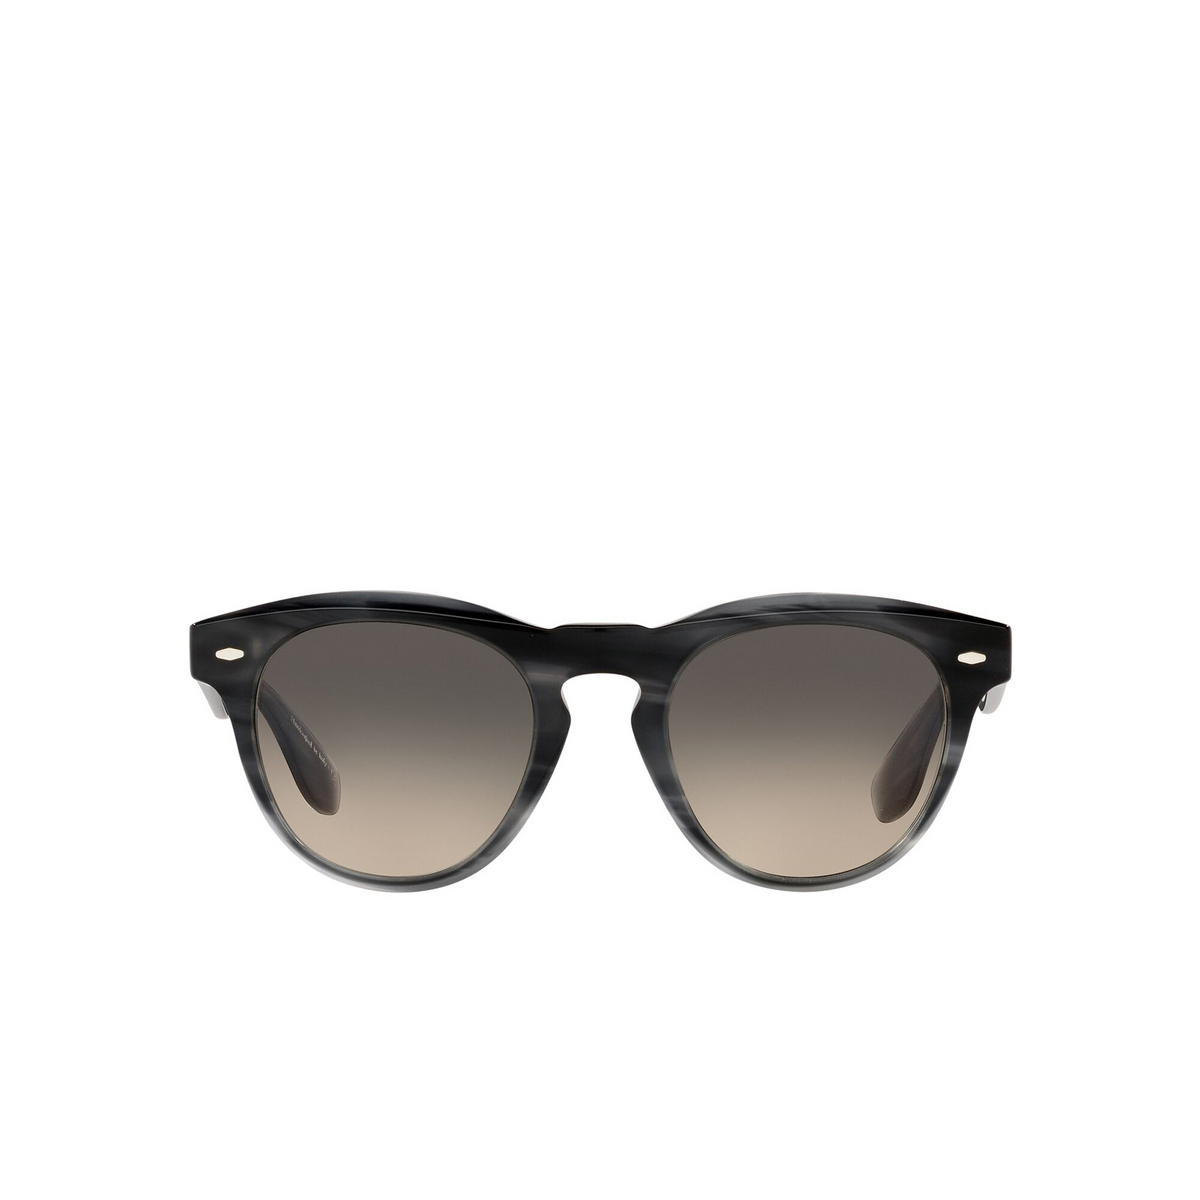 Oliver Peoples NINO Sunglasses 166132 Charcoal Tortoise - front view